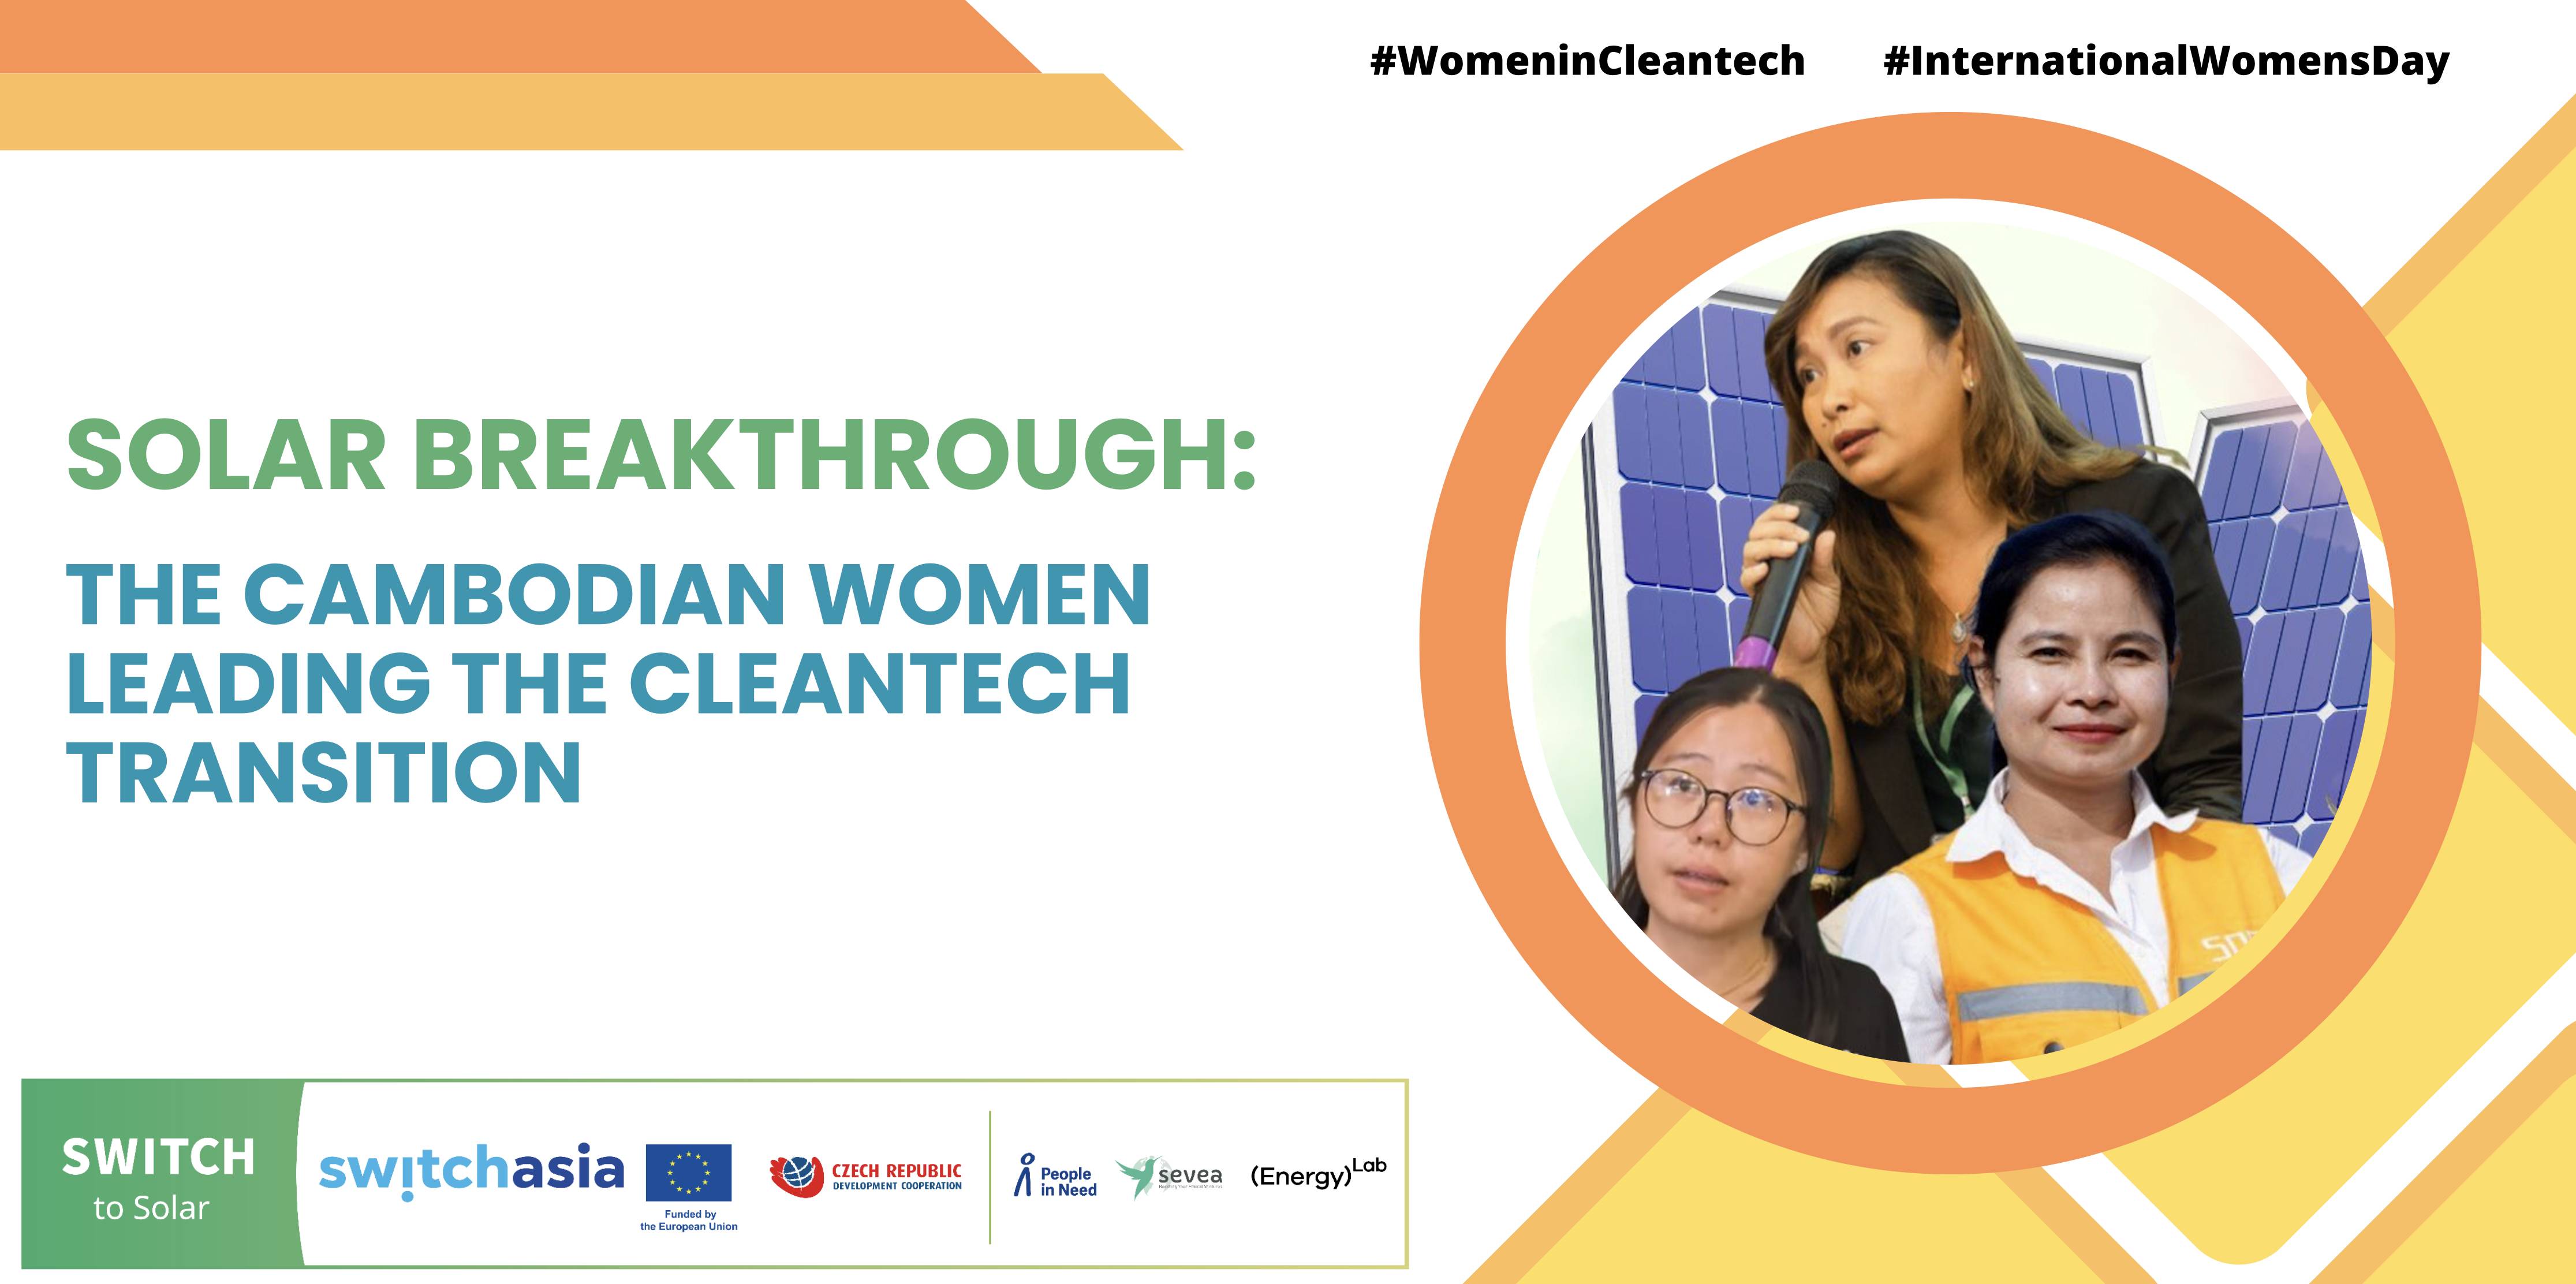 Solar Breakthrough: The Cambodian Women Leading the Cleantech Transition